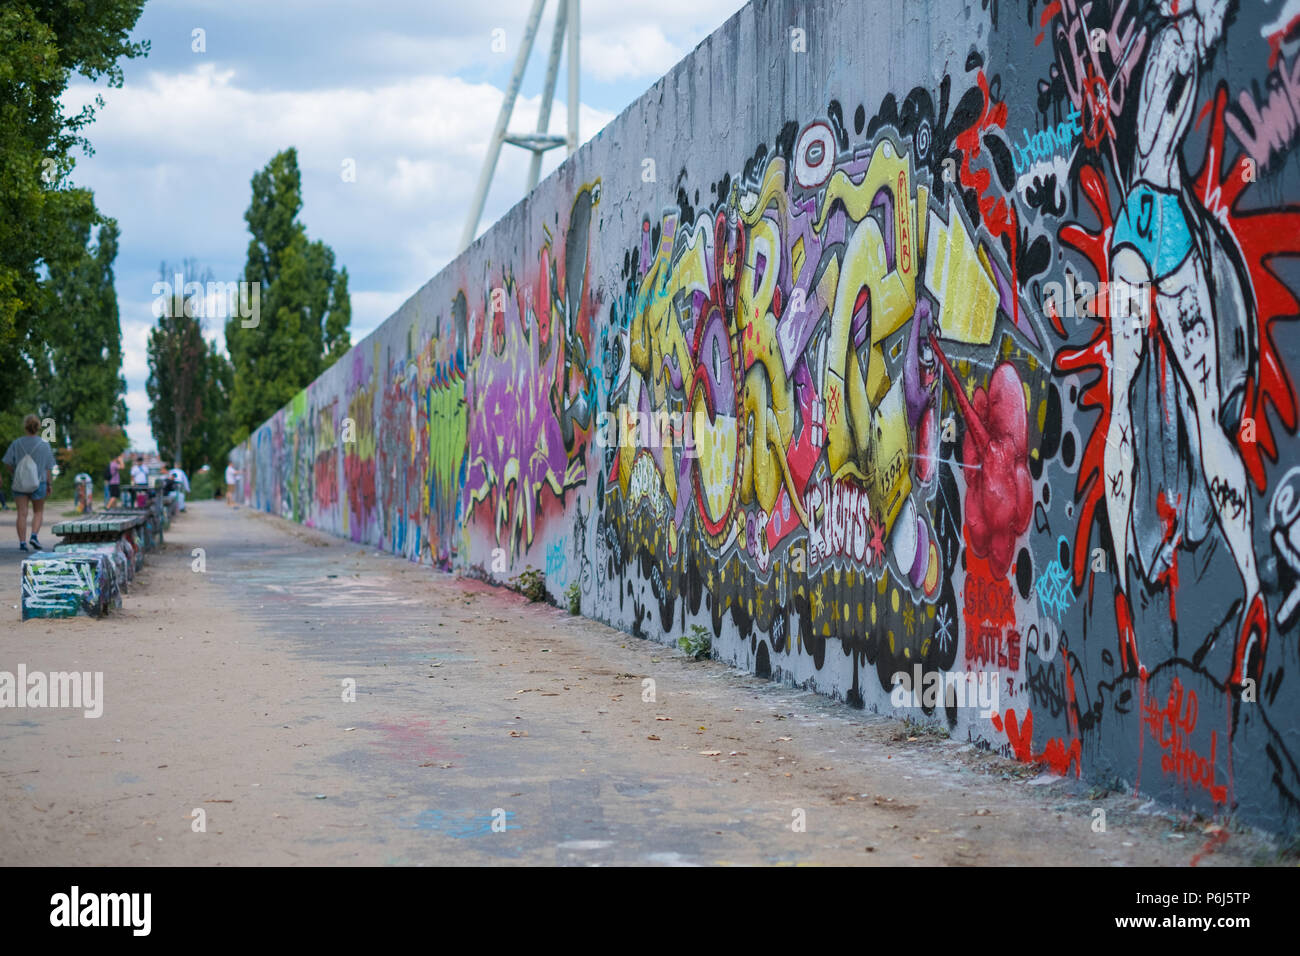 Berlin Germany June 18 Graffiti Wall At Berlin Mauerpark Former Boder Between East And West Berlin Stock Photo Alamy